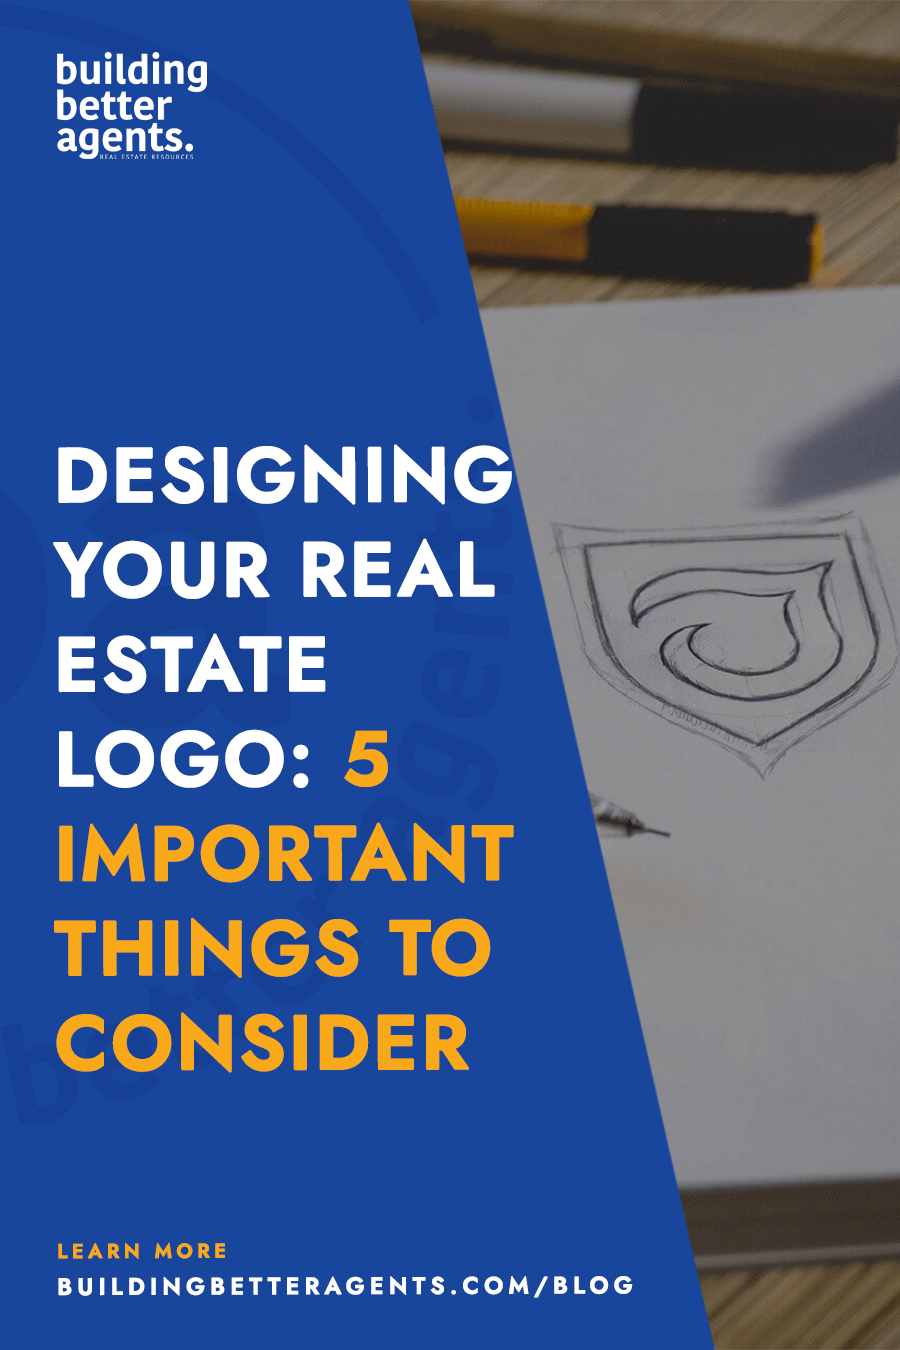 Designing Your Real Estate Logo: 5 Important Things to Consider